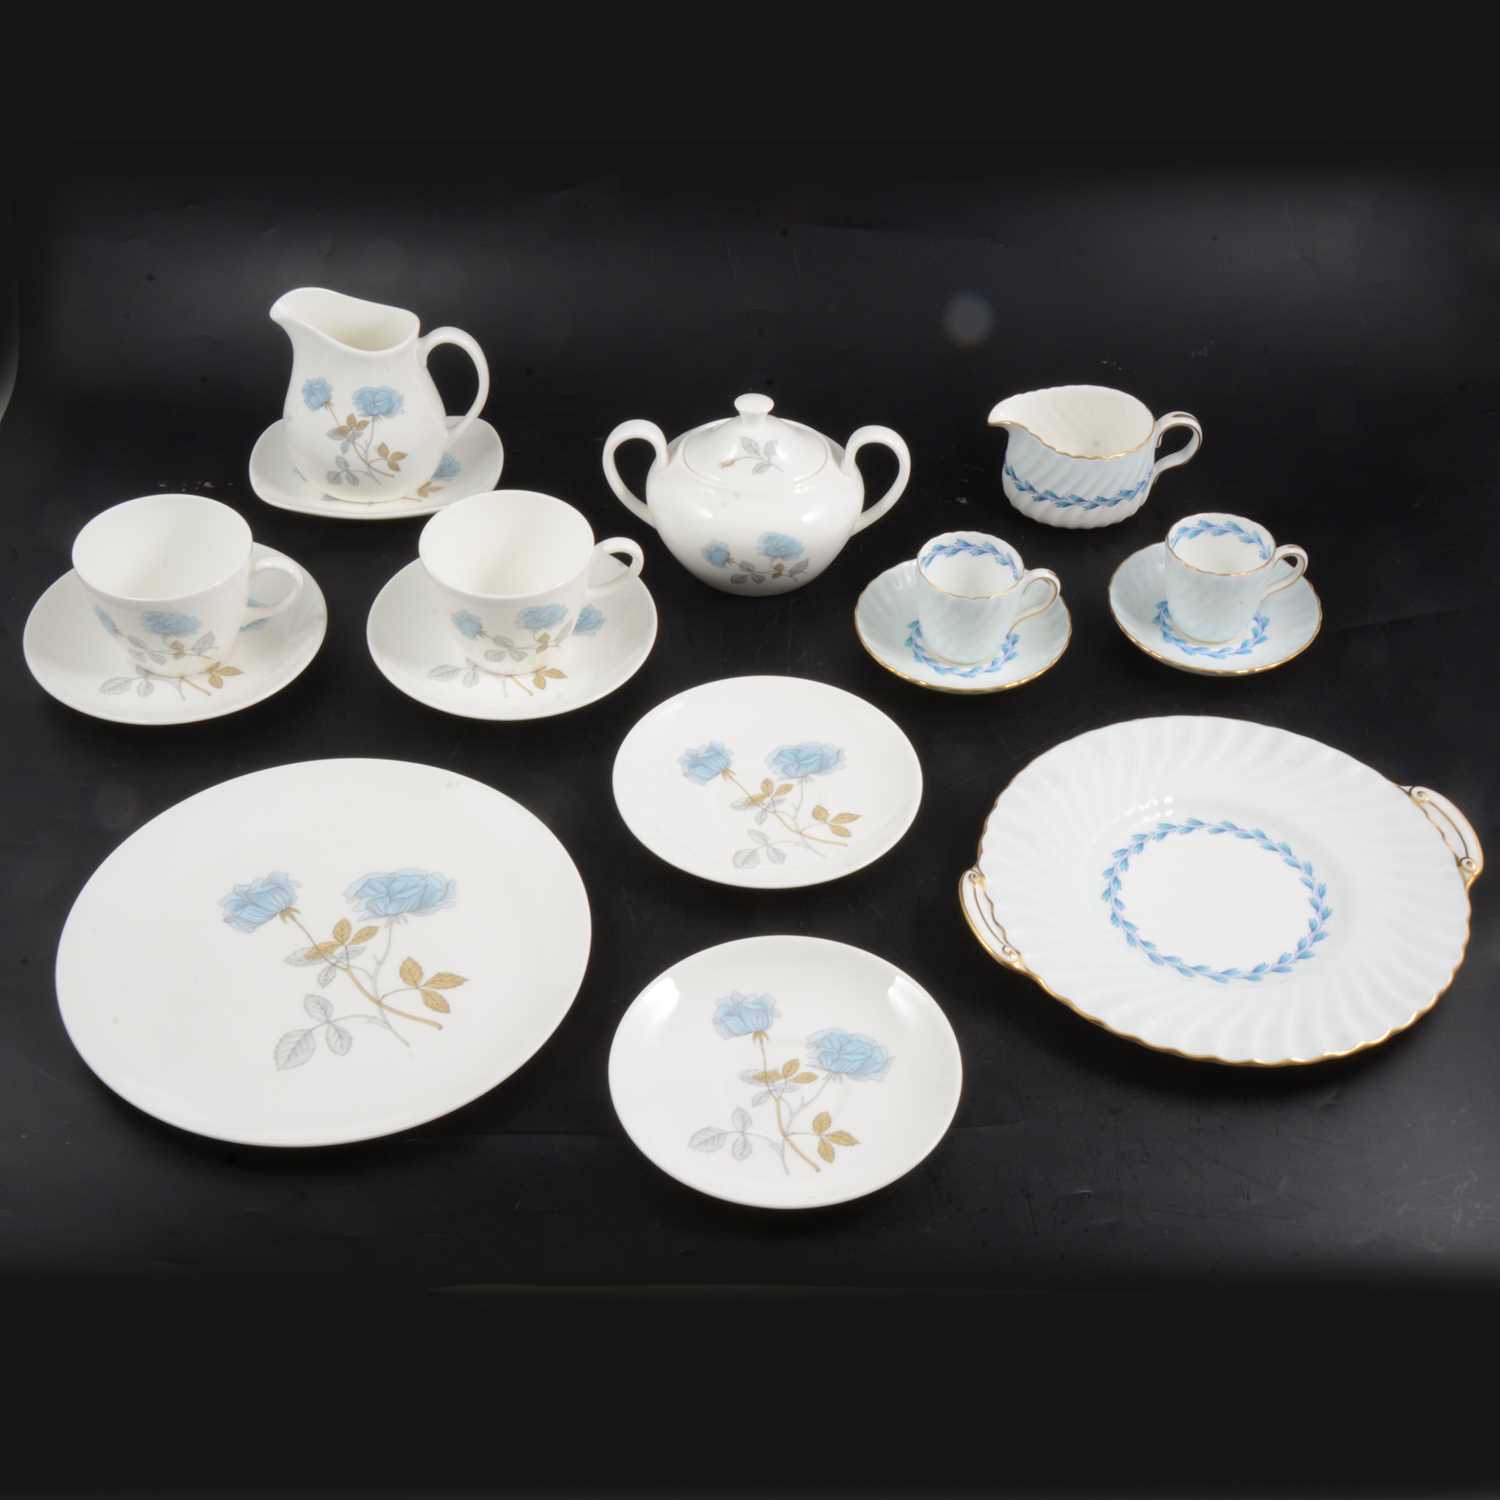 Lot 39 - Minton "Cheviot" part coffee set and Wedgwood "Ice Rose" part dinner service.